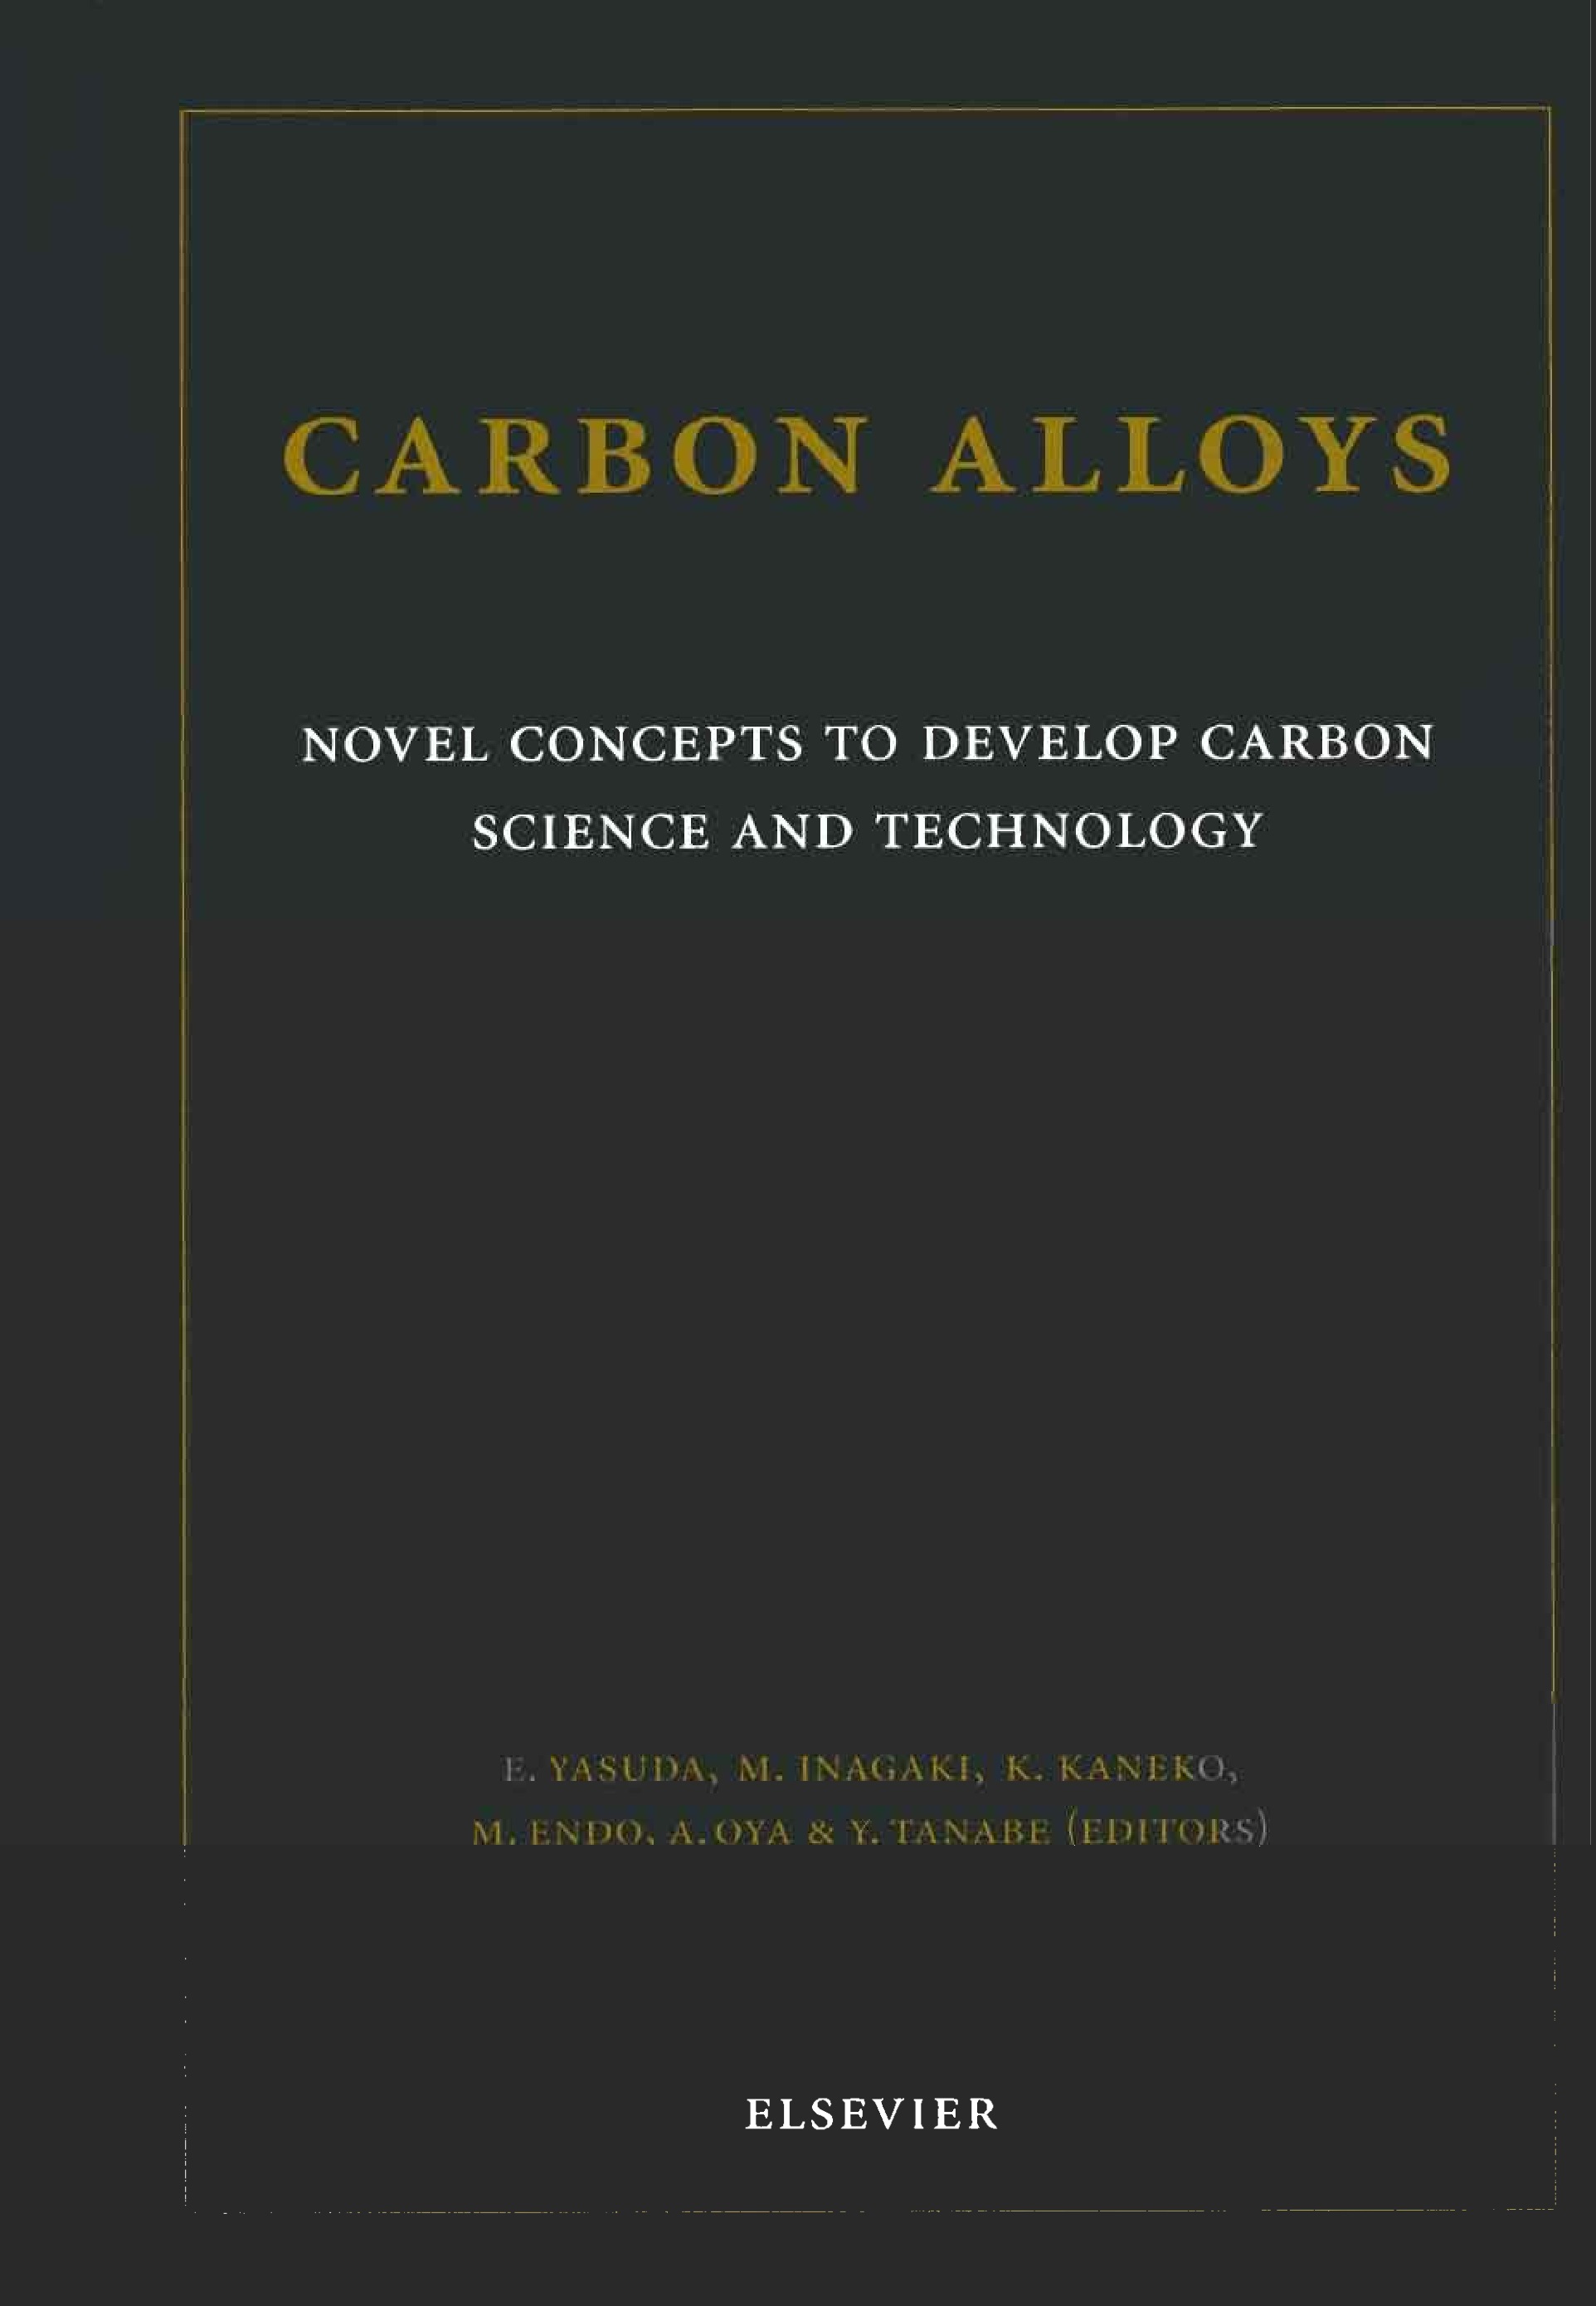 (Carbon Alloy (Novel Concepts to Develop Carbon Science and Technology